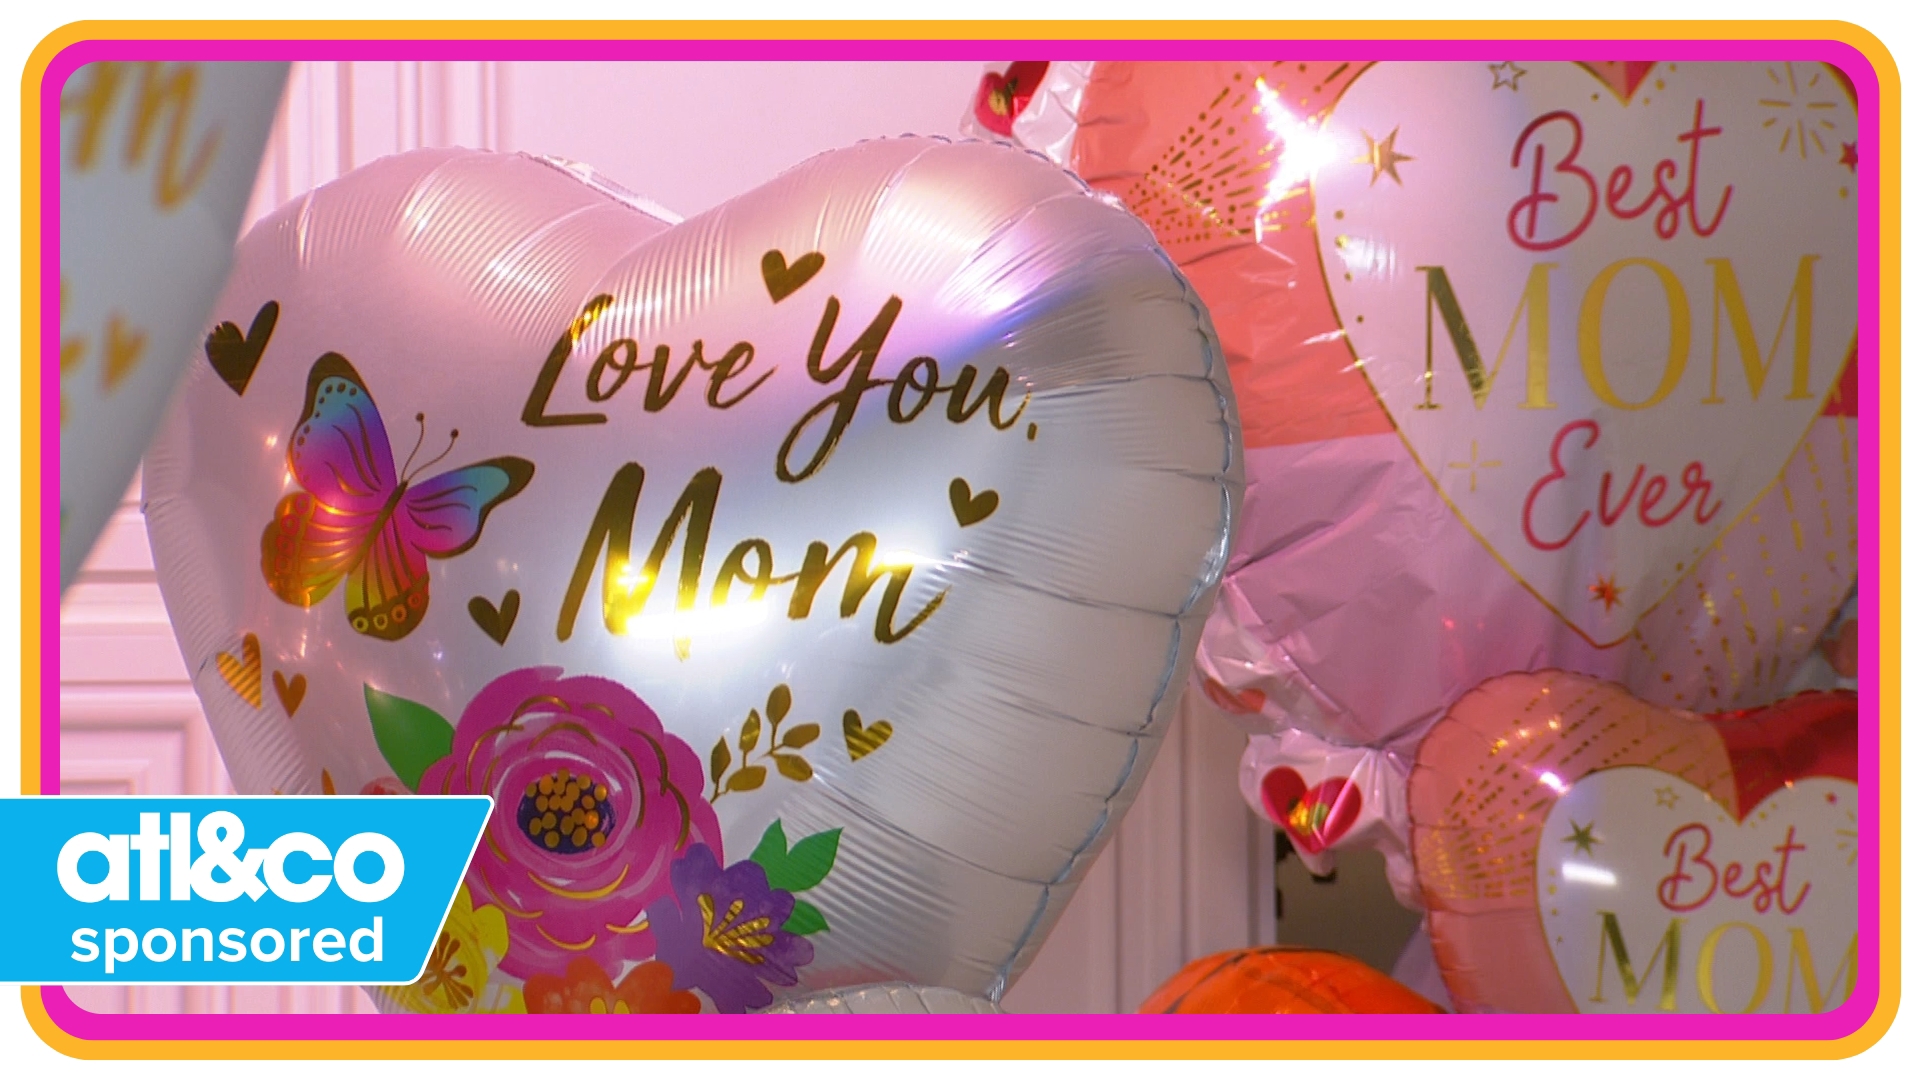 Celebrate mom this Mother's Day with a custom balloon bouquet! | PAID CONTENT